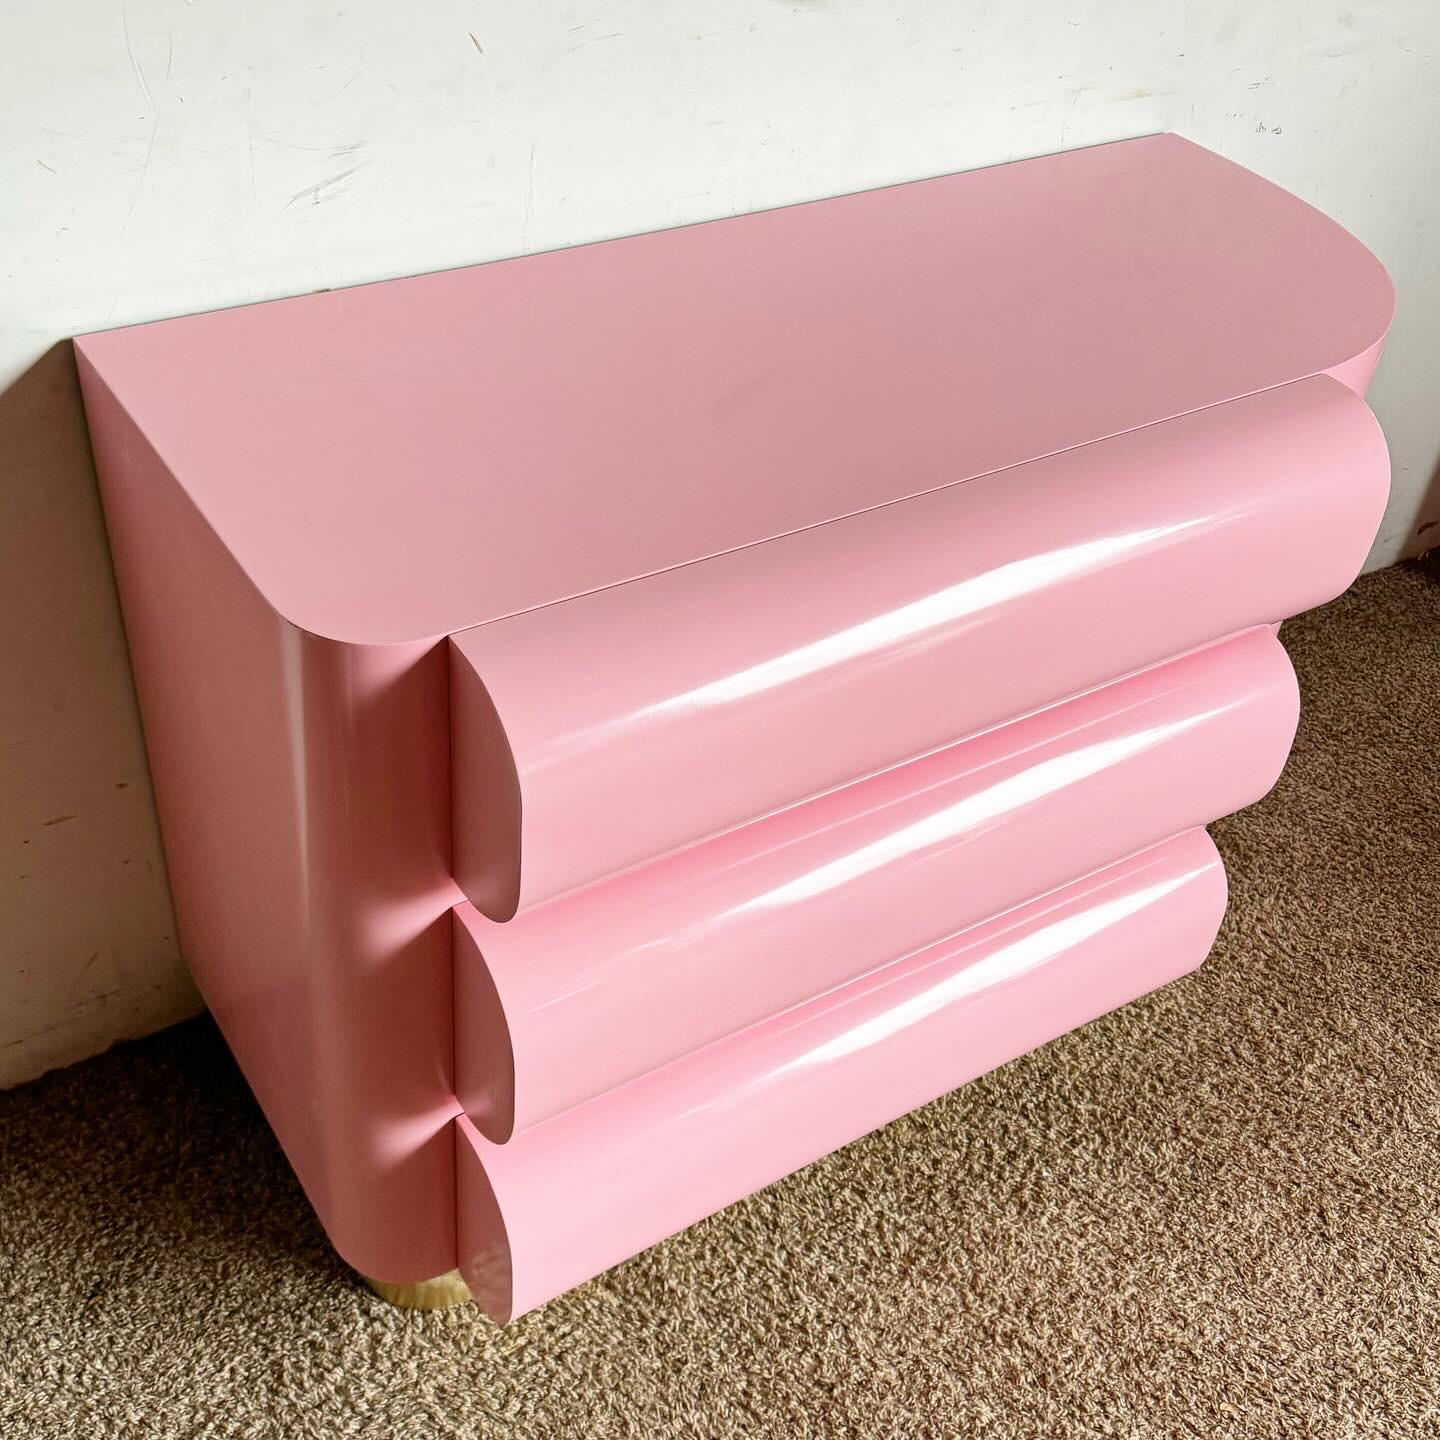 Transform your space with the Postmodern Pink Lacquered Curved Bullnose Commode/Chest of Drawers. This piece boasts a unique curved design and a vibrant pink lacquer finish, creating a modern and playful statement. The smooth bullnose edges enhance